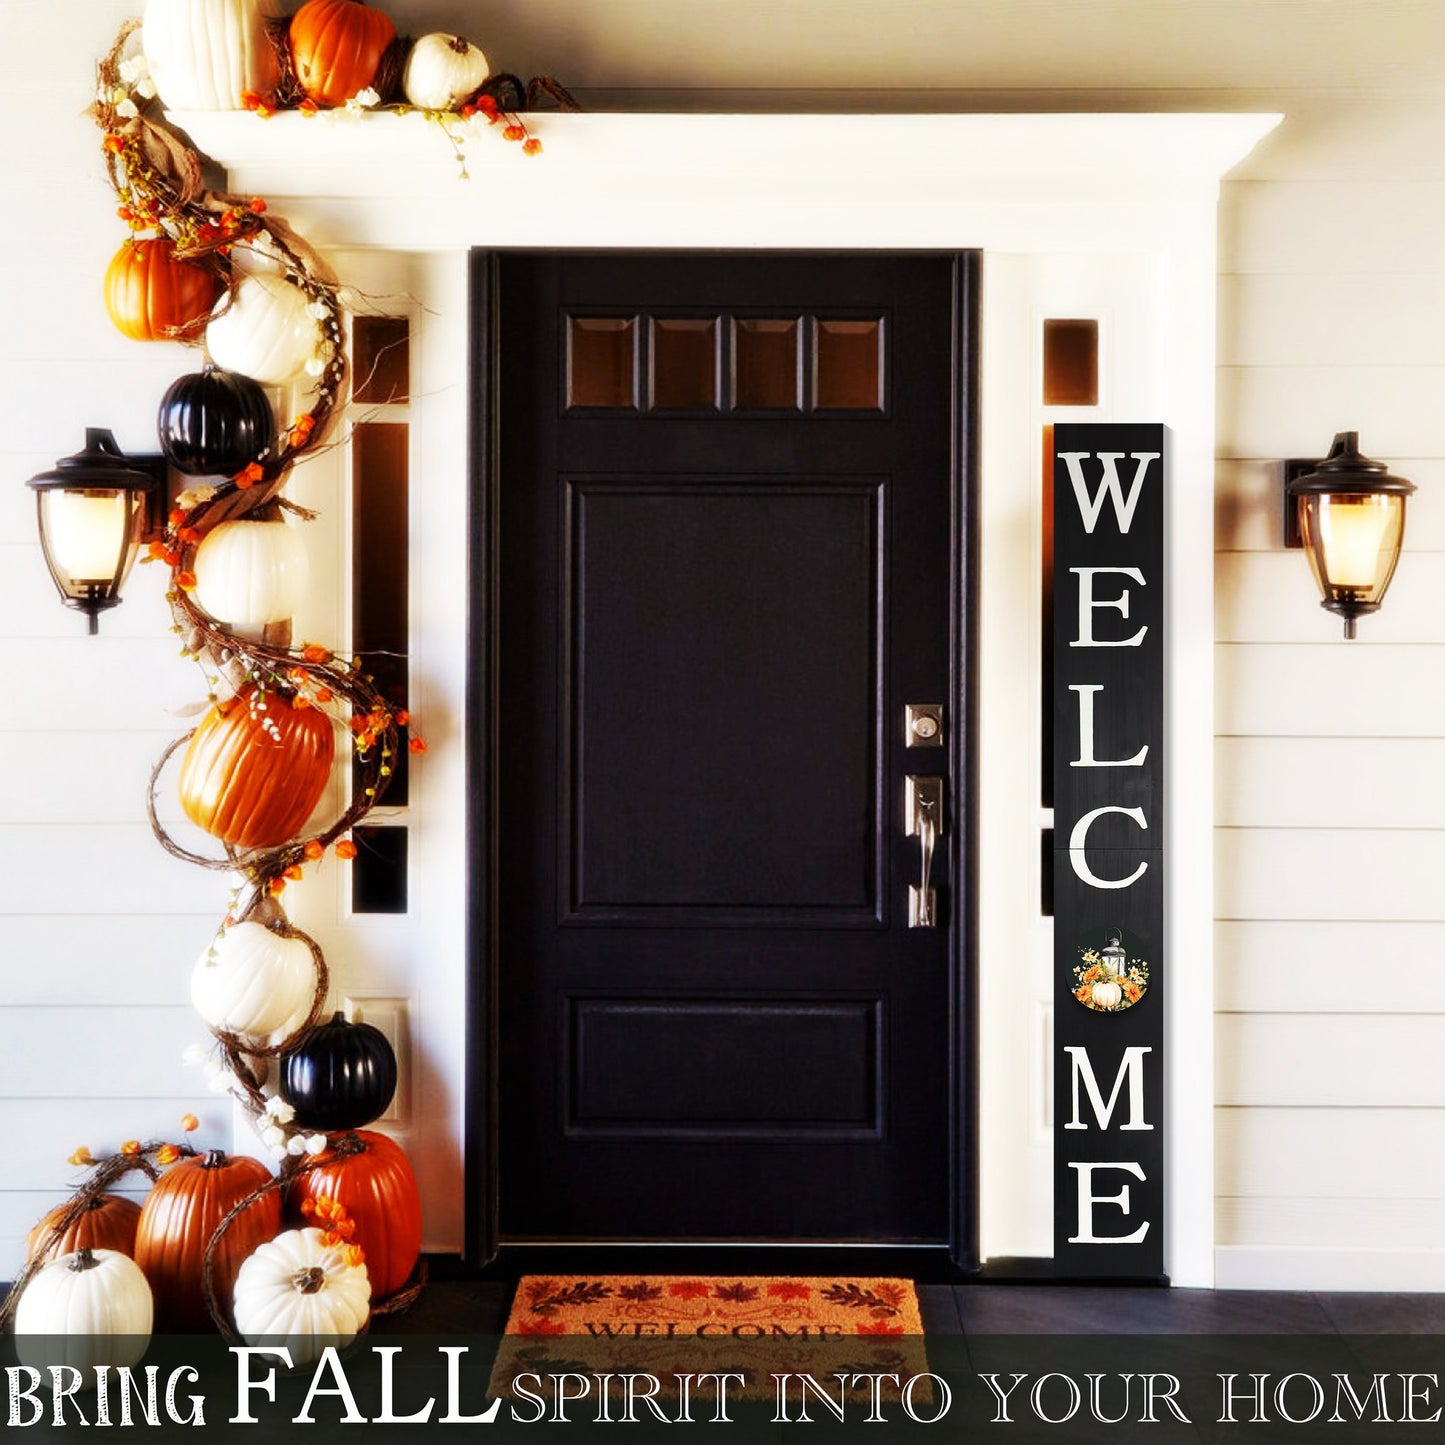 72in "Welcome" Fall Porch Sign with Lantern Design - Black Porch Board Decor for Front Door during Autumn and Thanksgiving Celebrations